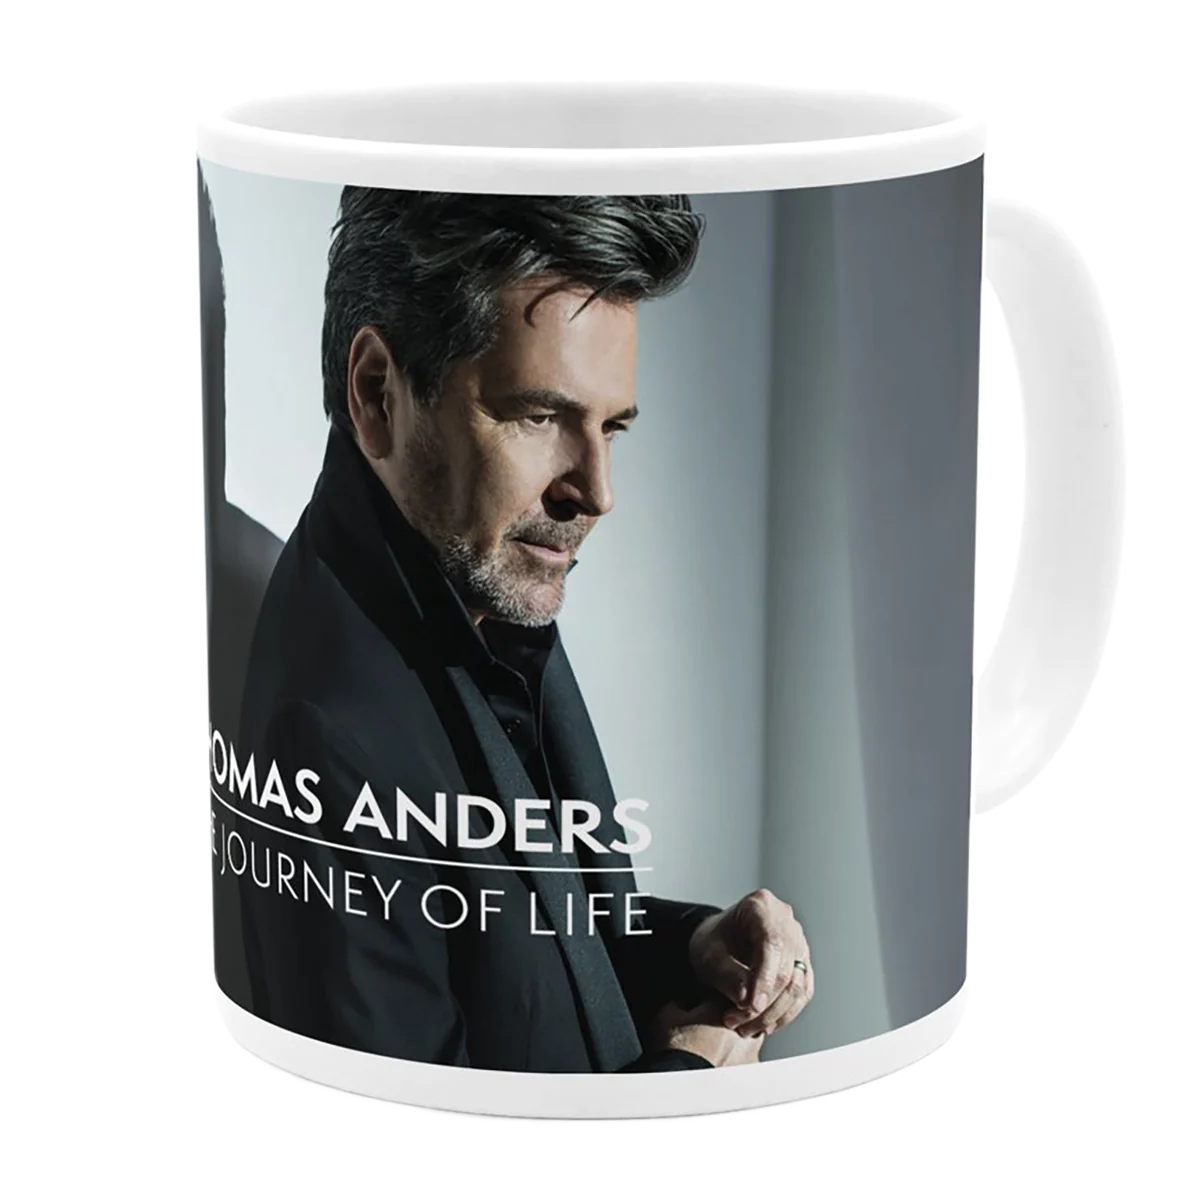 Thomas Anders Tasse The Journey of life